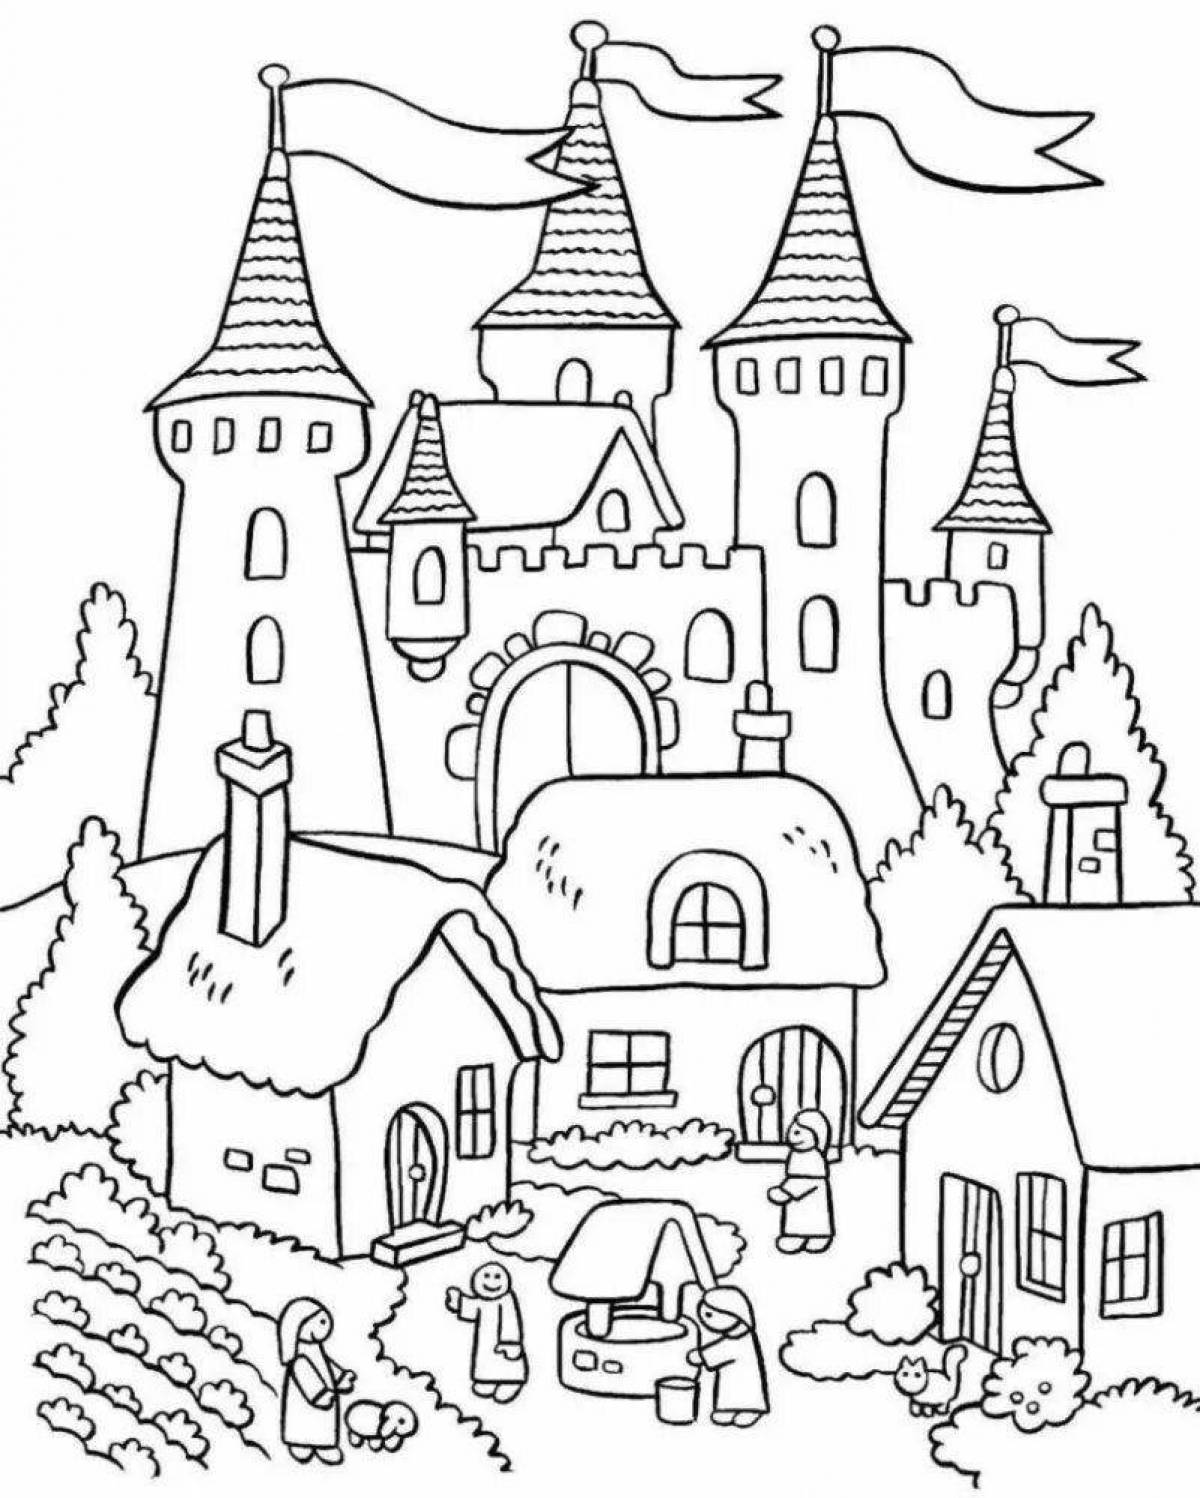 Mysterious princess house coloring book for kids